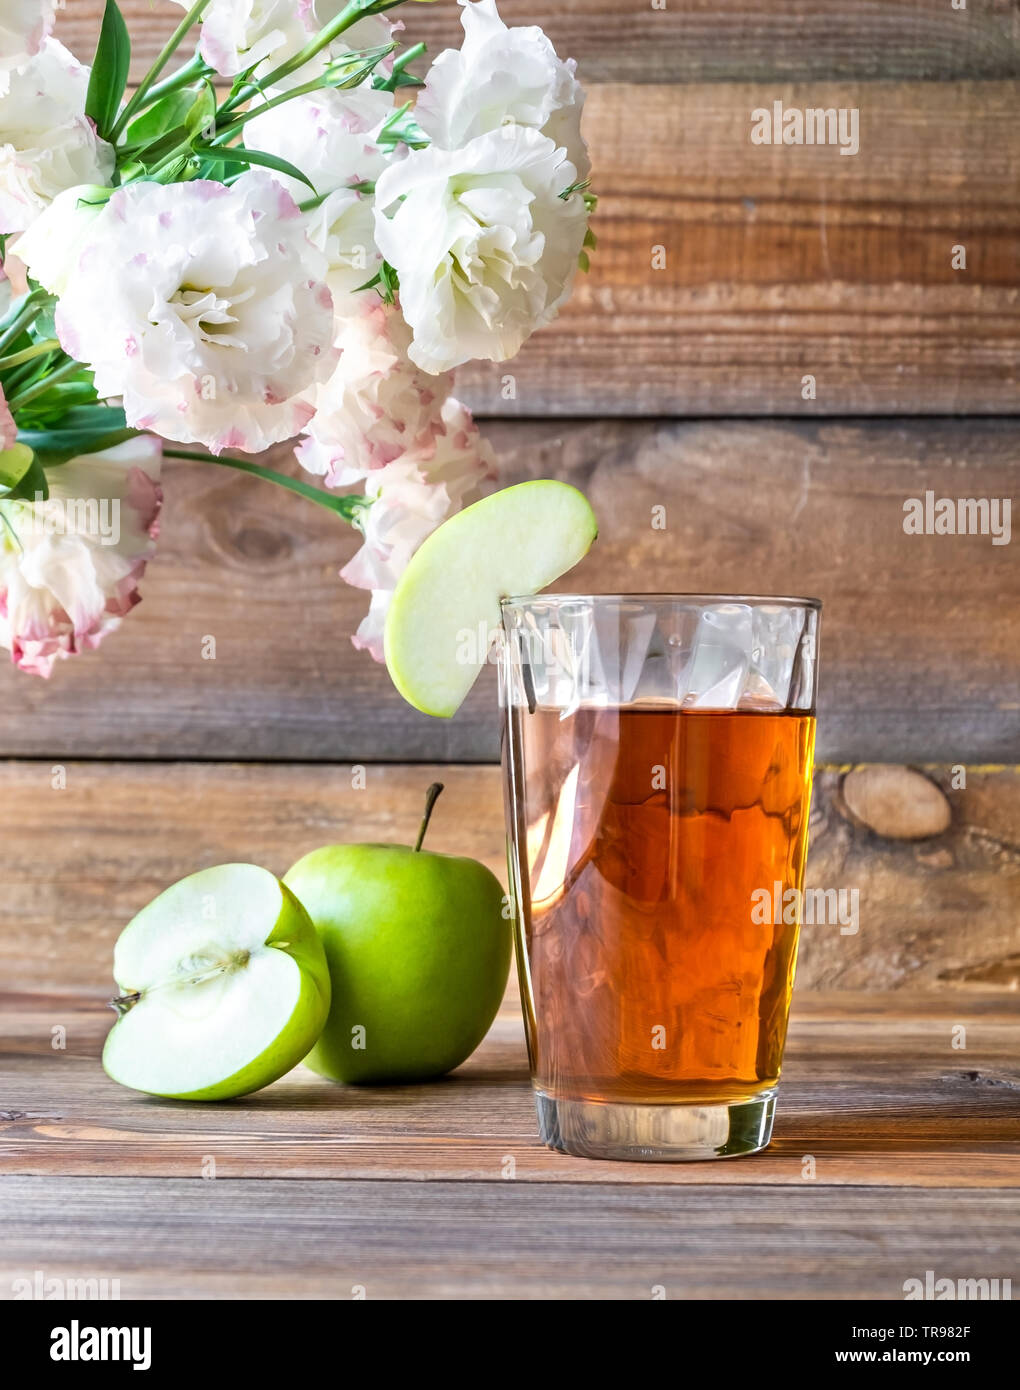 Glass of apple juice with fresh apples on the wooden background Stock Photo